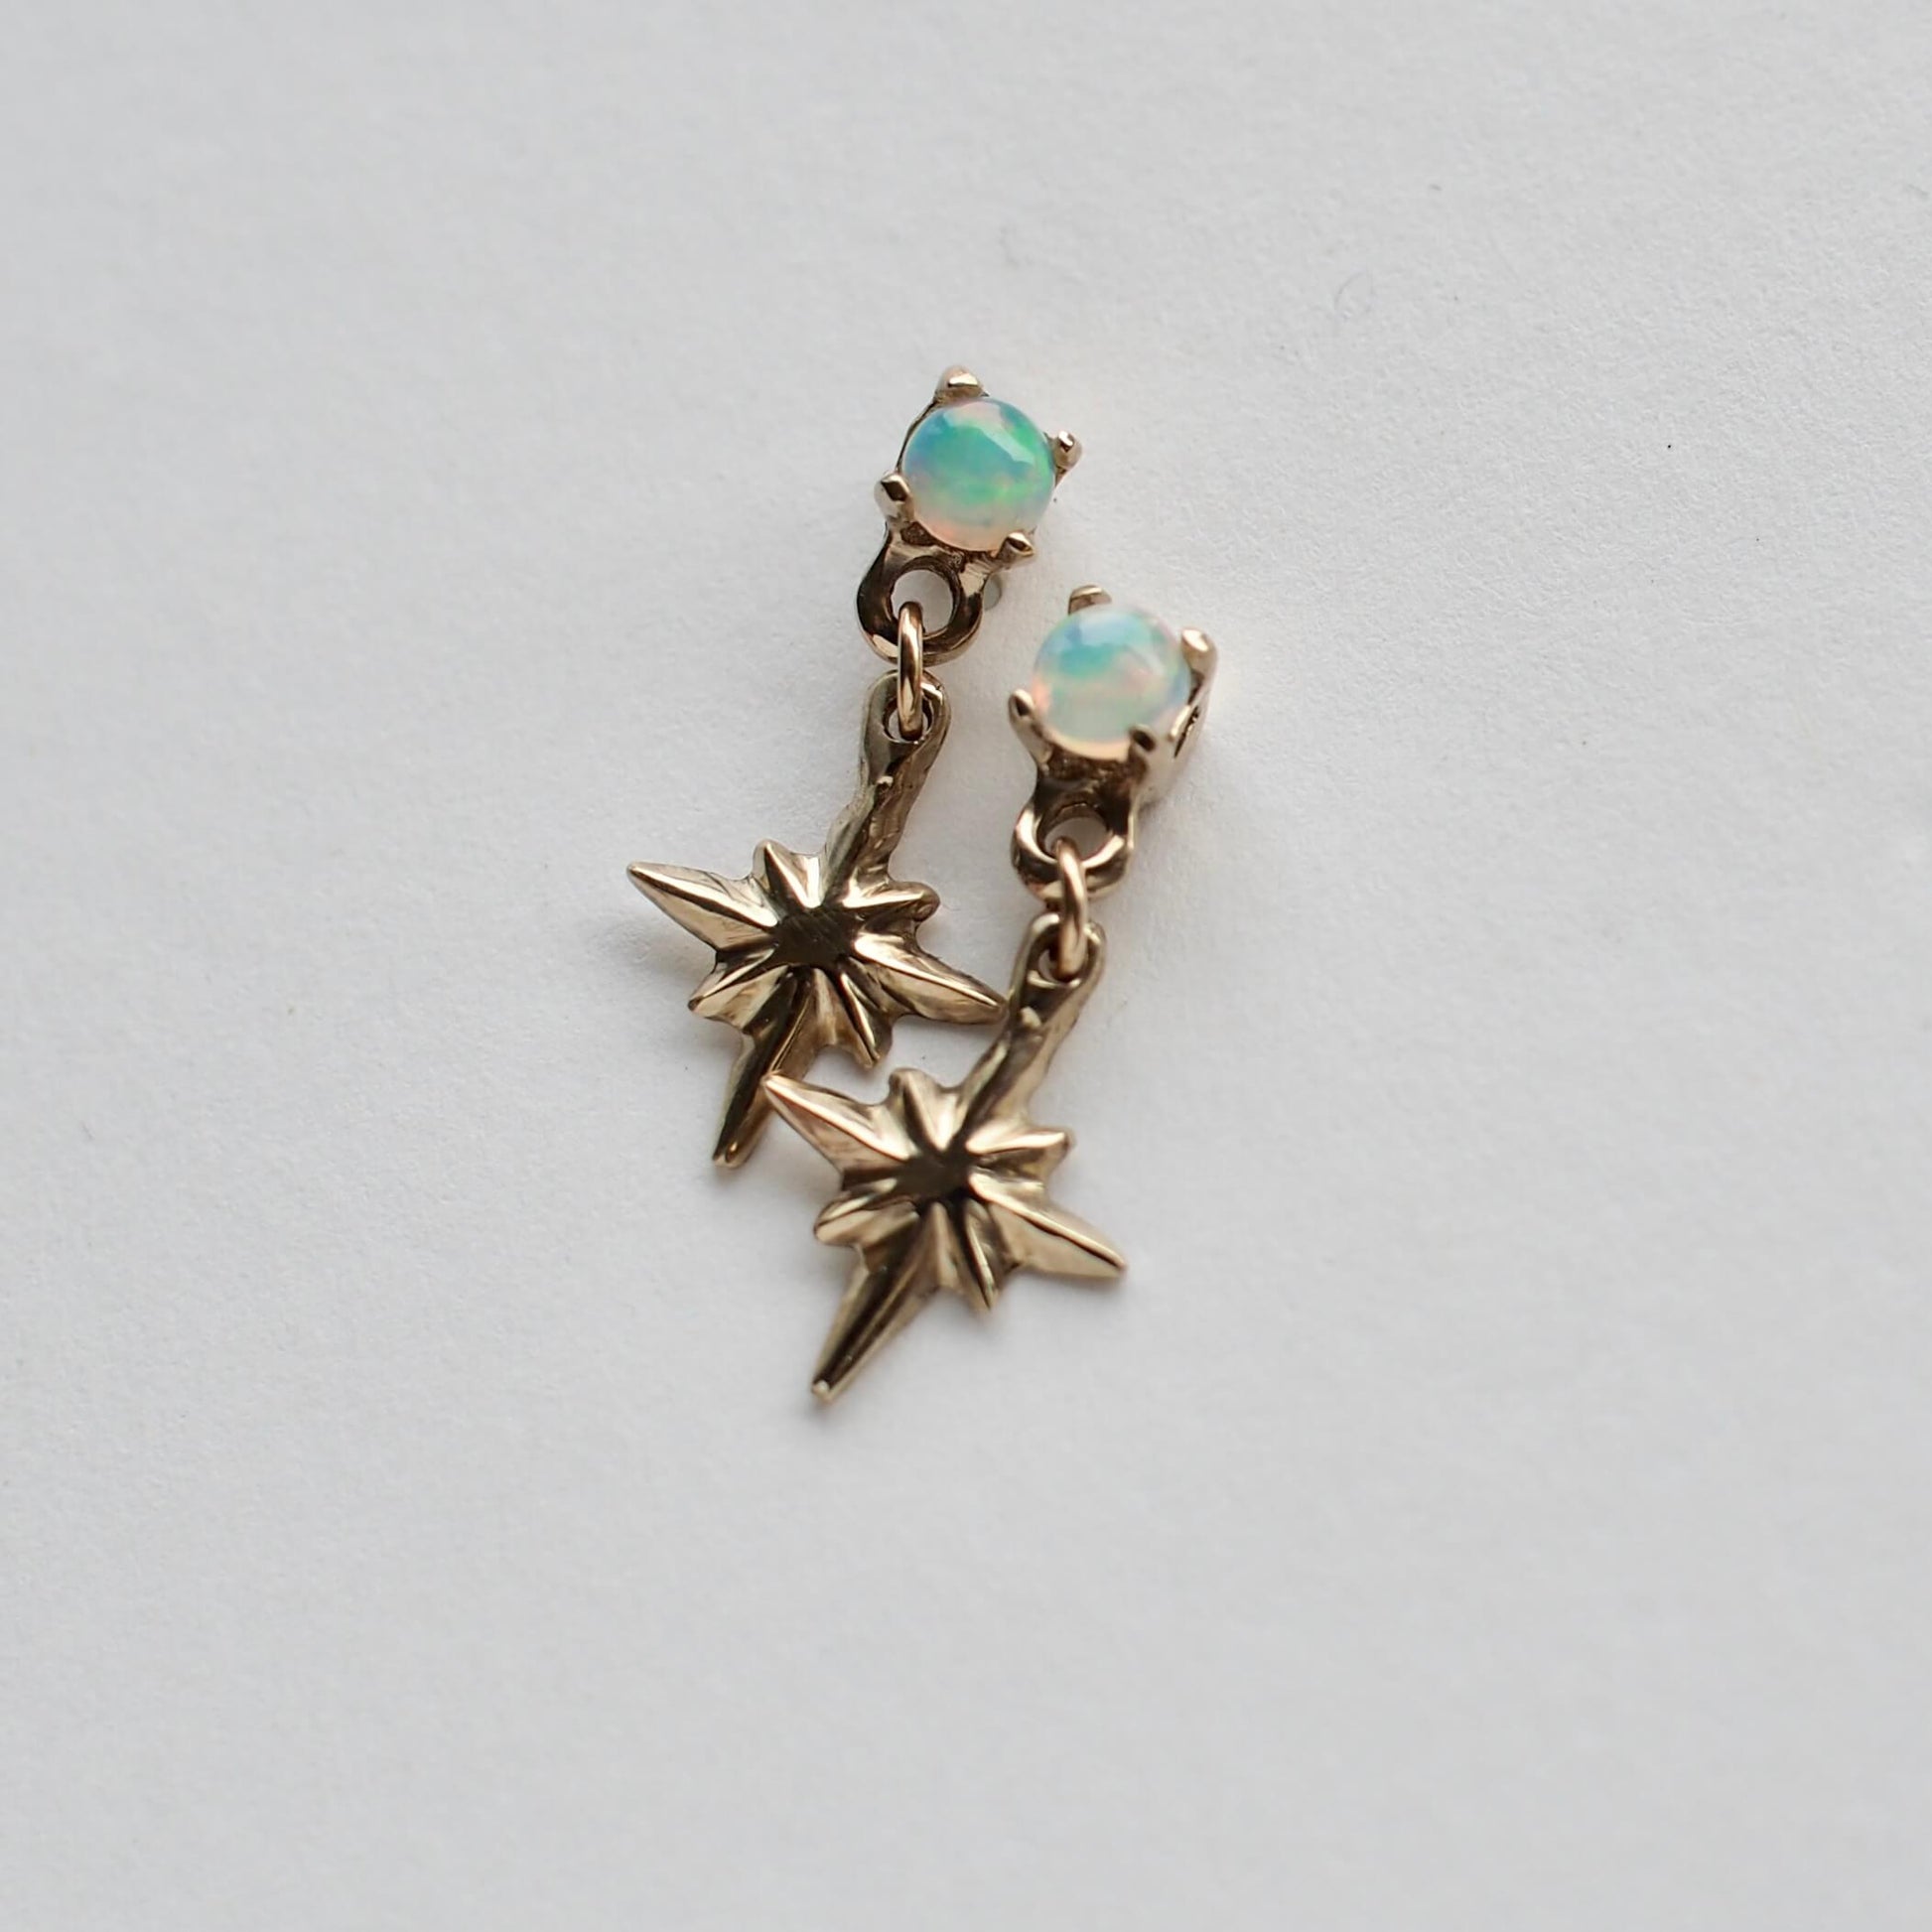 Tiny celestial earrings in gold tone bronze, set with opals